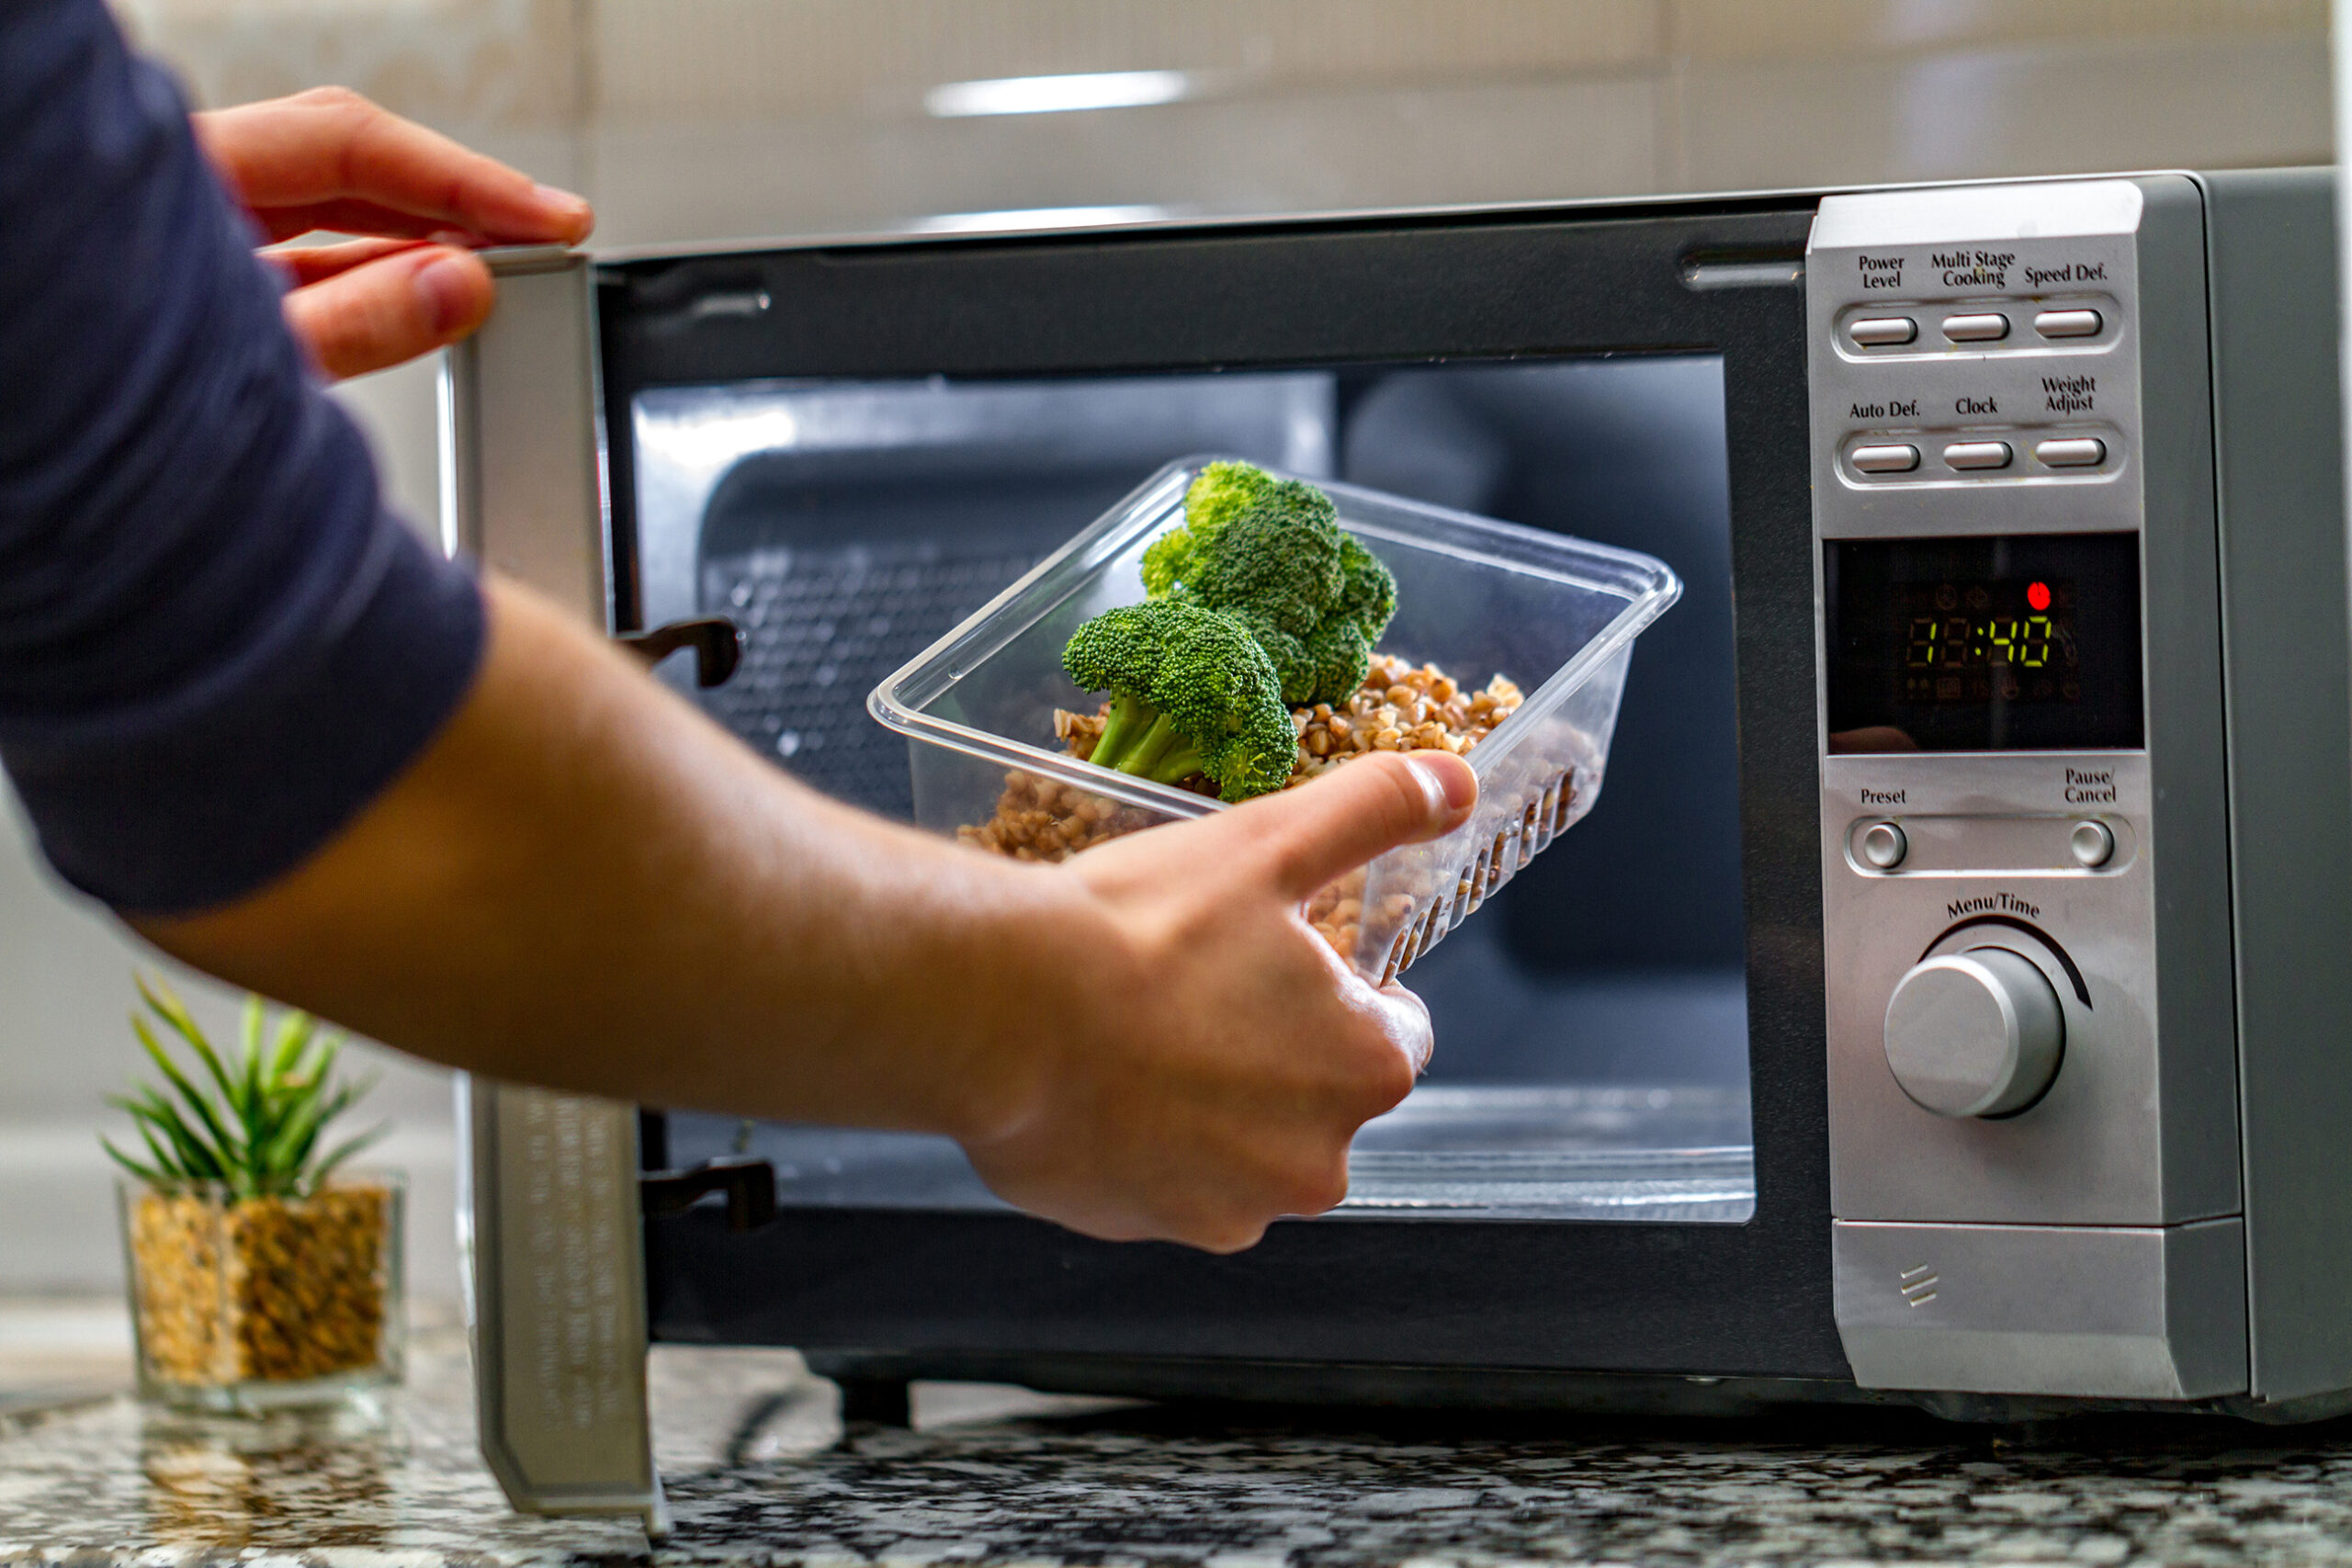 Is It Safe to Microwave Plastic? Answering Common Safety Questions